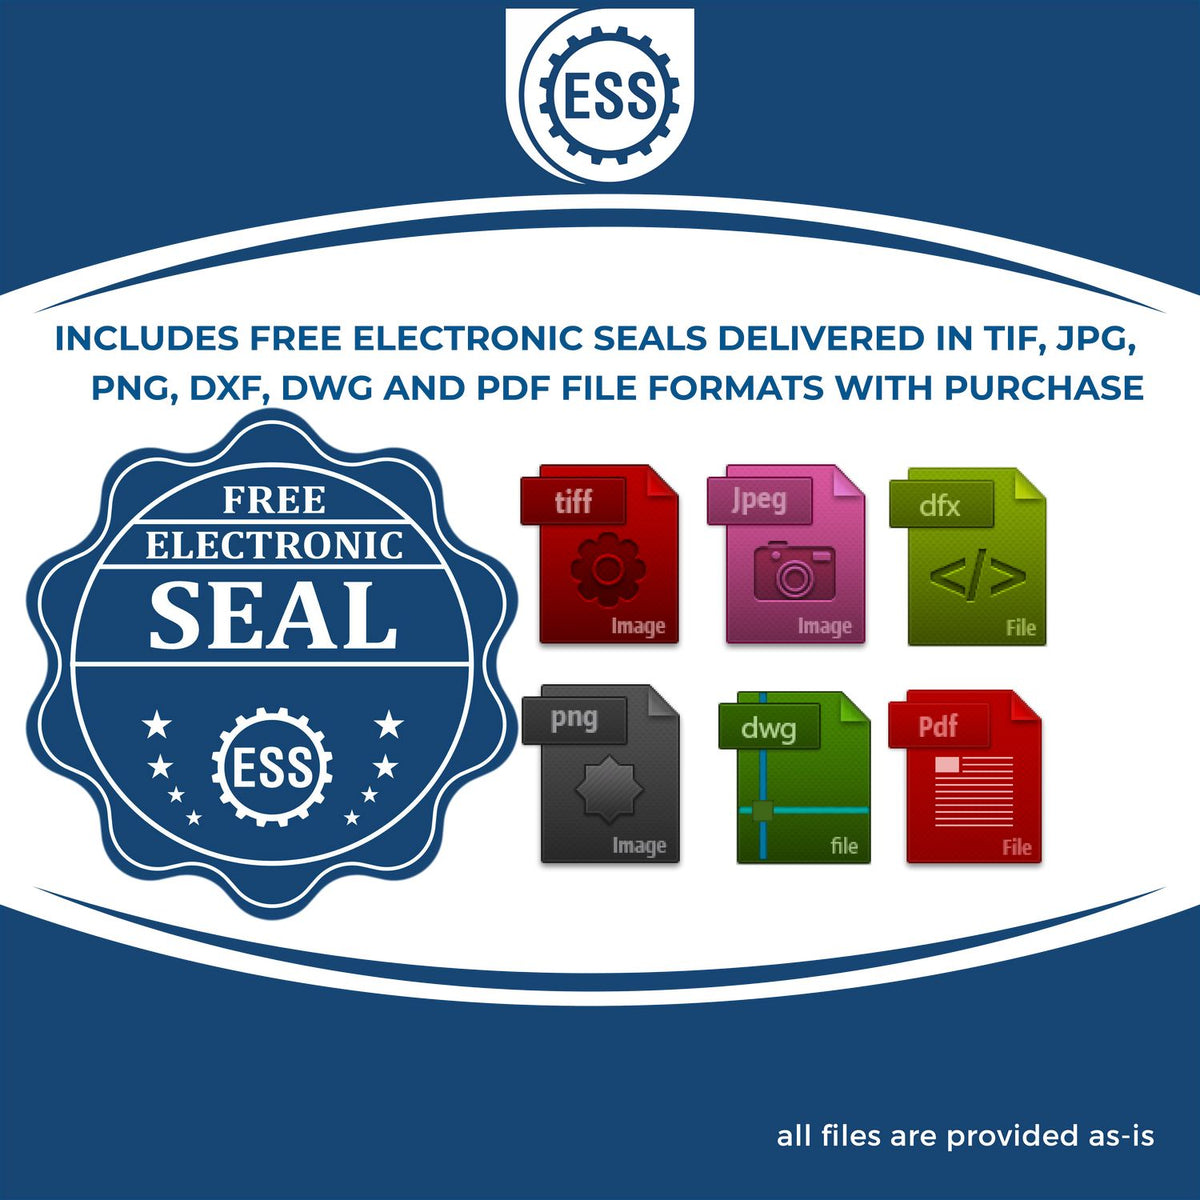 An infographic for the free electronic seal for the Soft Missouri Professional Geologist Seal illustrating the different file type icons such as DXF, DWG, TIF, JPG and PNG.